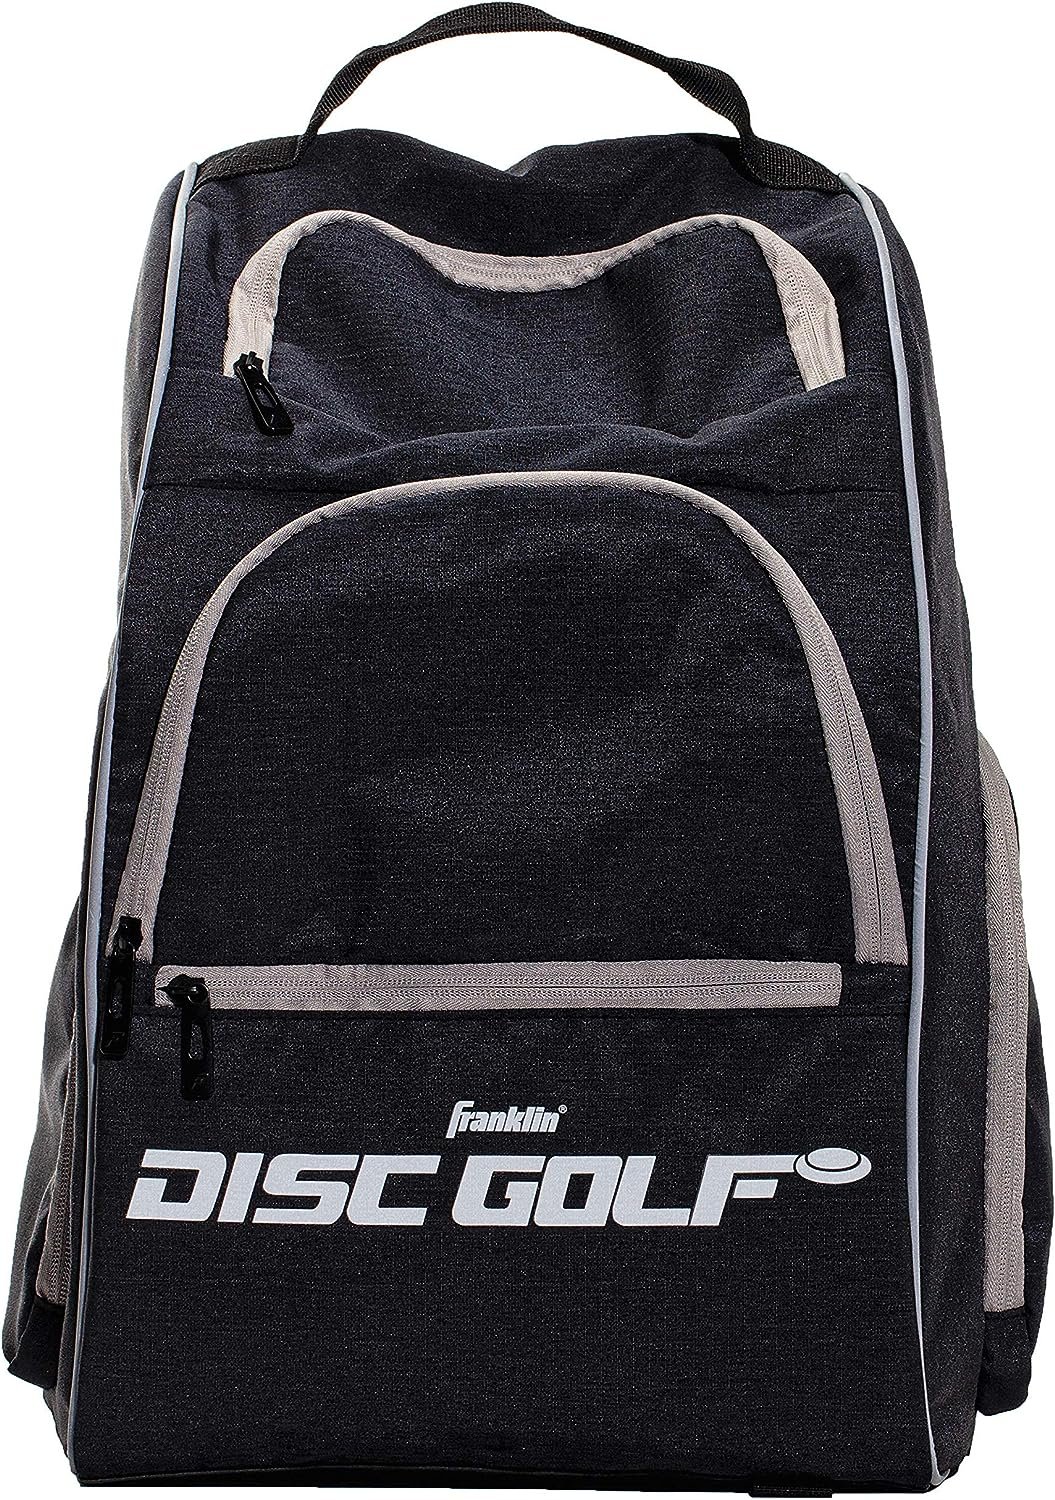 Comparing 5 Disc Golf Bags: Which Bag is Right for You?